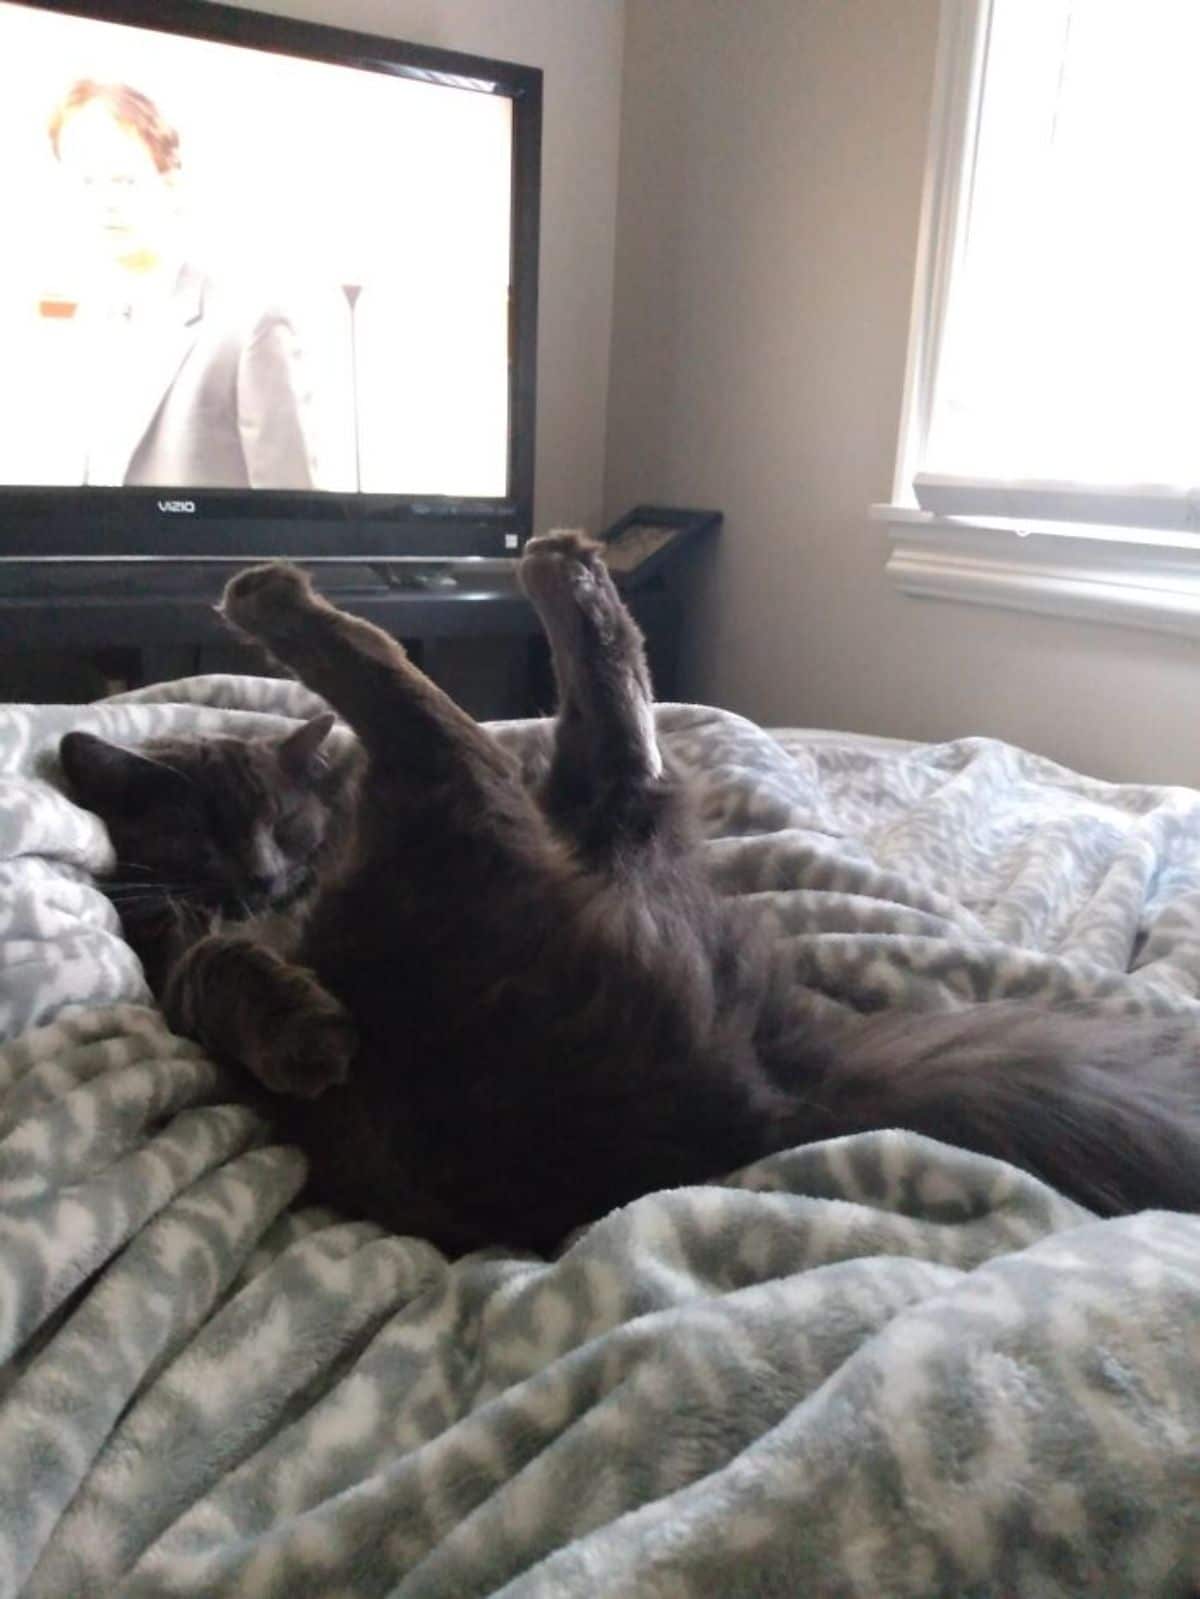 fluffy black cat sleeping on a grey and white blanket on a bed with the back legs lifted up in the air